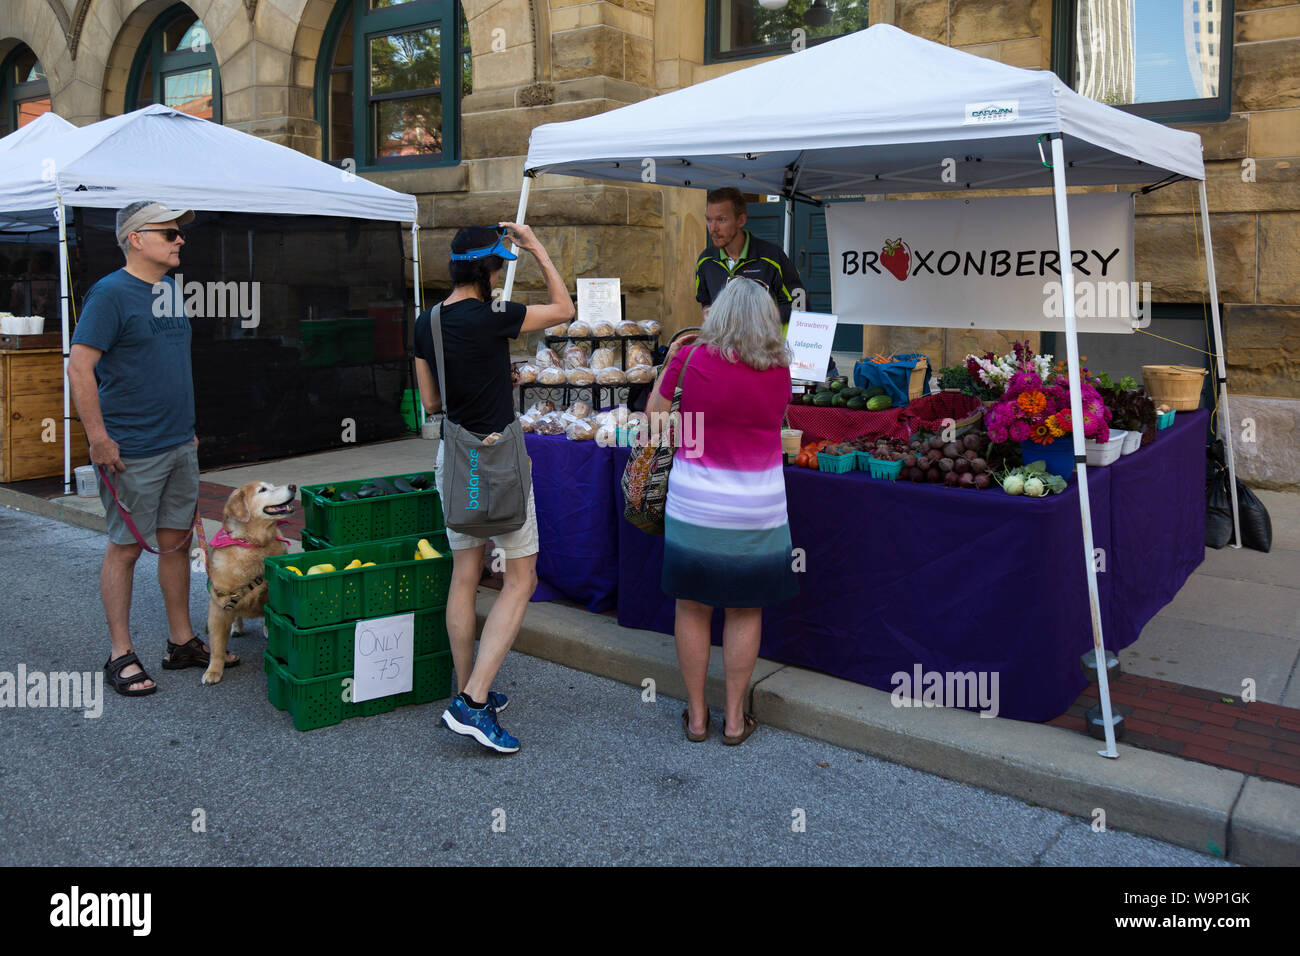 A vendor in the Broxonberry booth at Fort Wayne's Farmers' Market promotes his products to customers in downtown Fort Wayne, Indiana, USA. Stock Photo